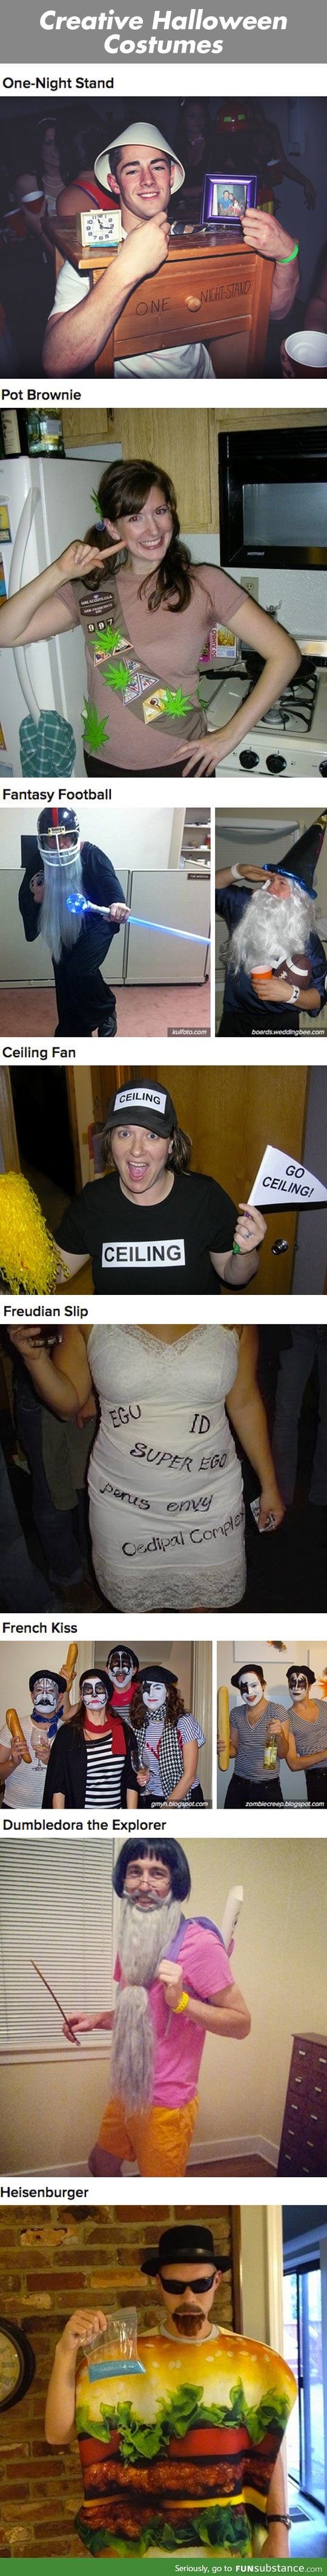 The most creative halloween costumes